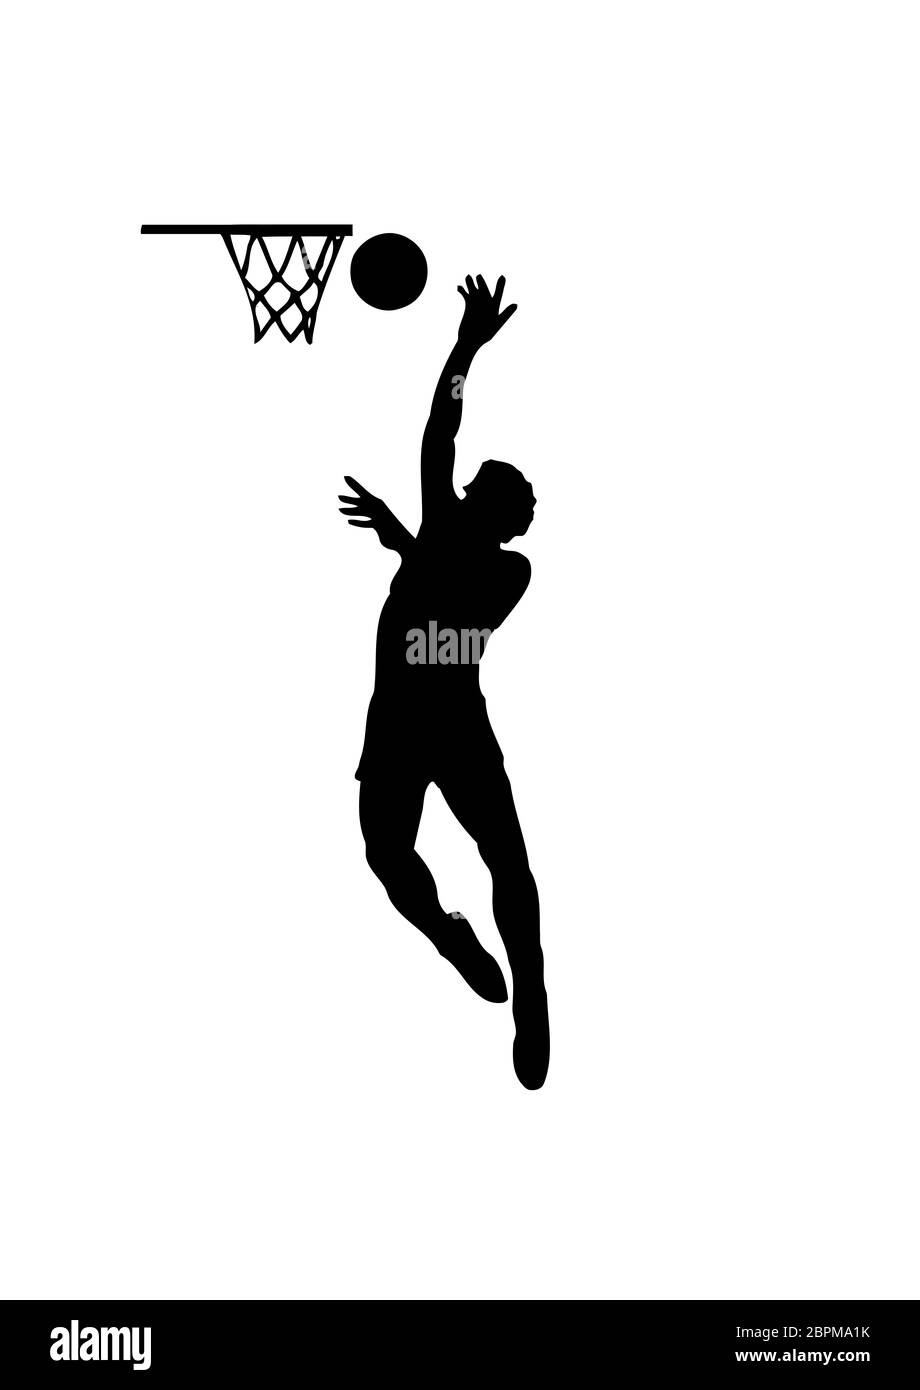 basketball player sport silhouette action jump illustration Stock Photo ...